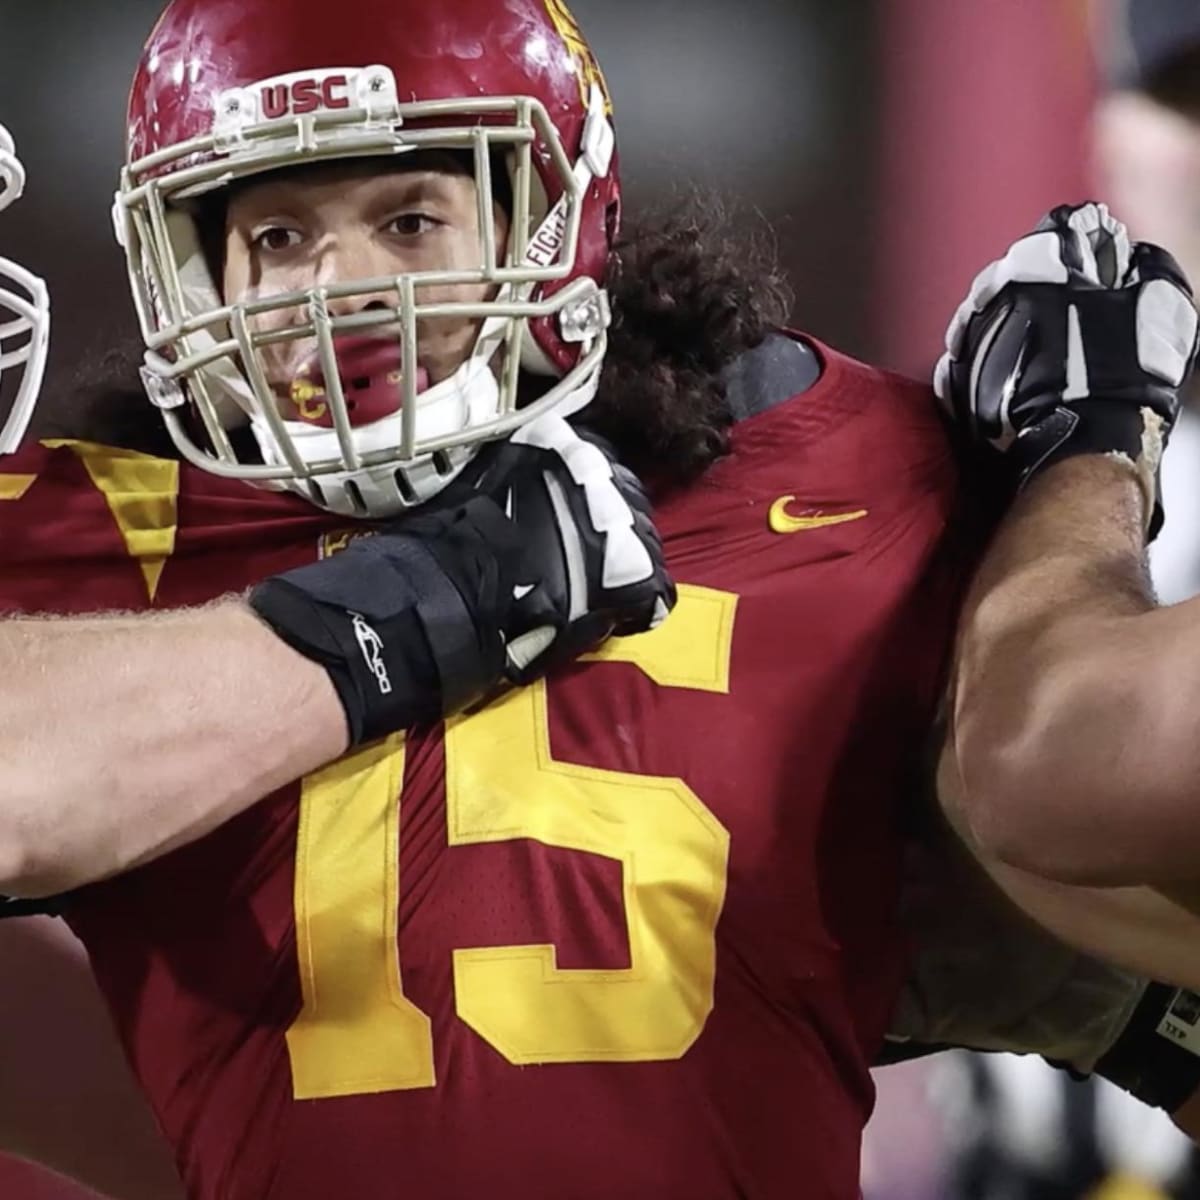 2021 NFL draft: Talanoa Hufanga's nose for the ball is a big asset